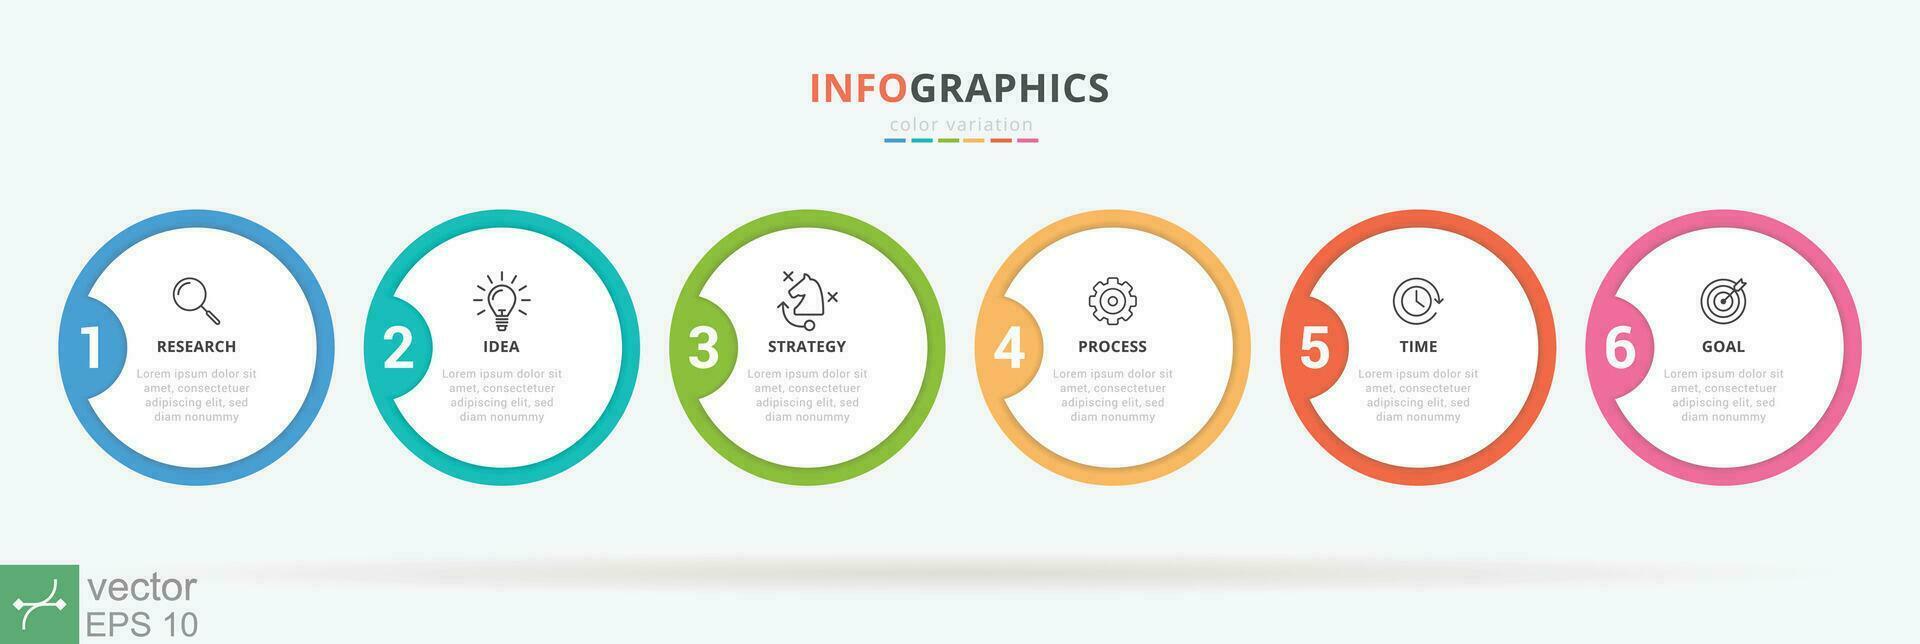 Infographic 6 steps or options, circle shape design template with icons. Can be used for process diagram, presentations, workflow layout, banner, flow chart, info graph. Vector illustration EPS 10.